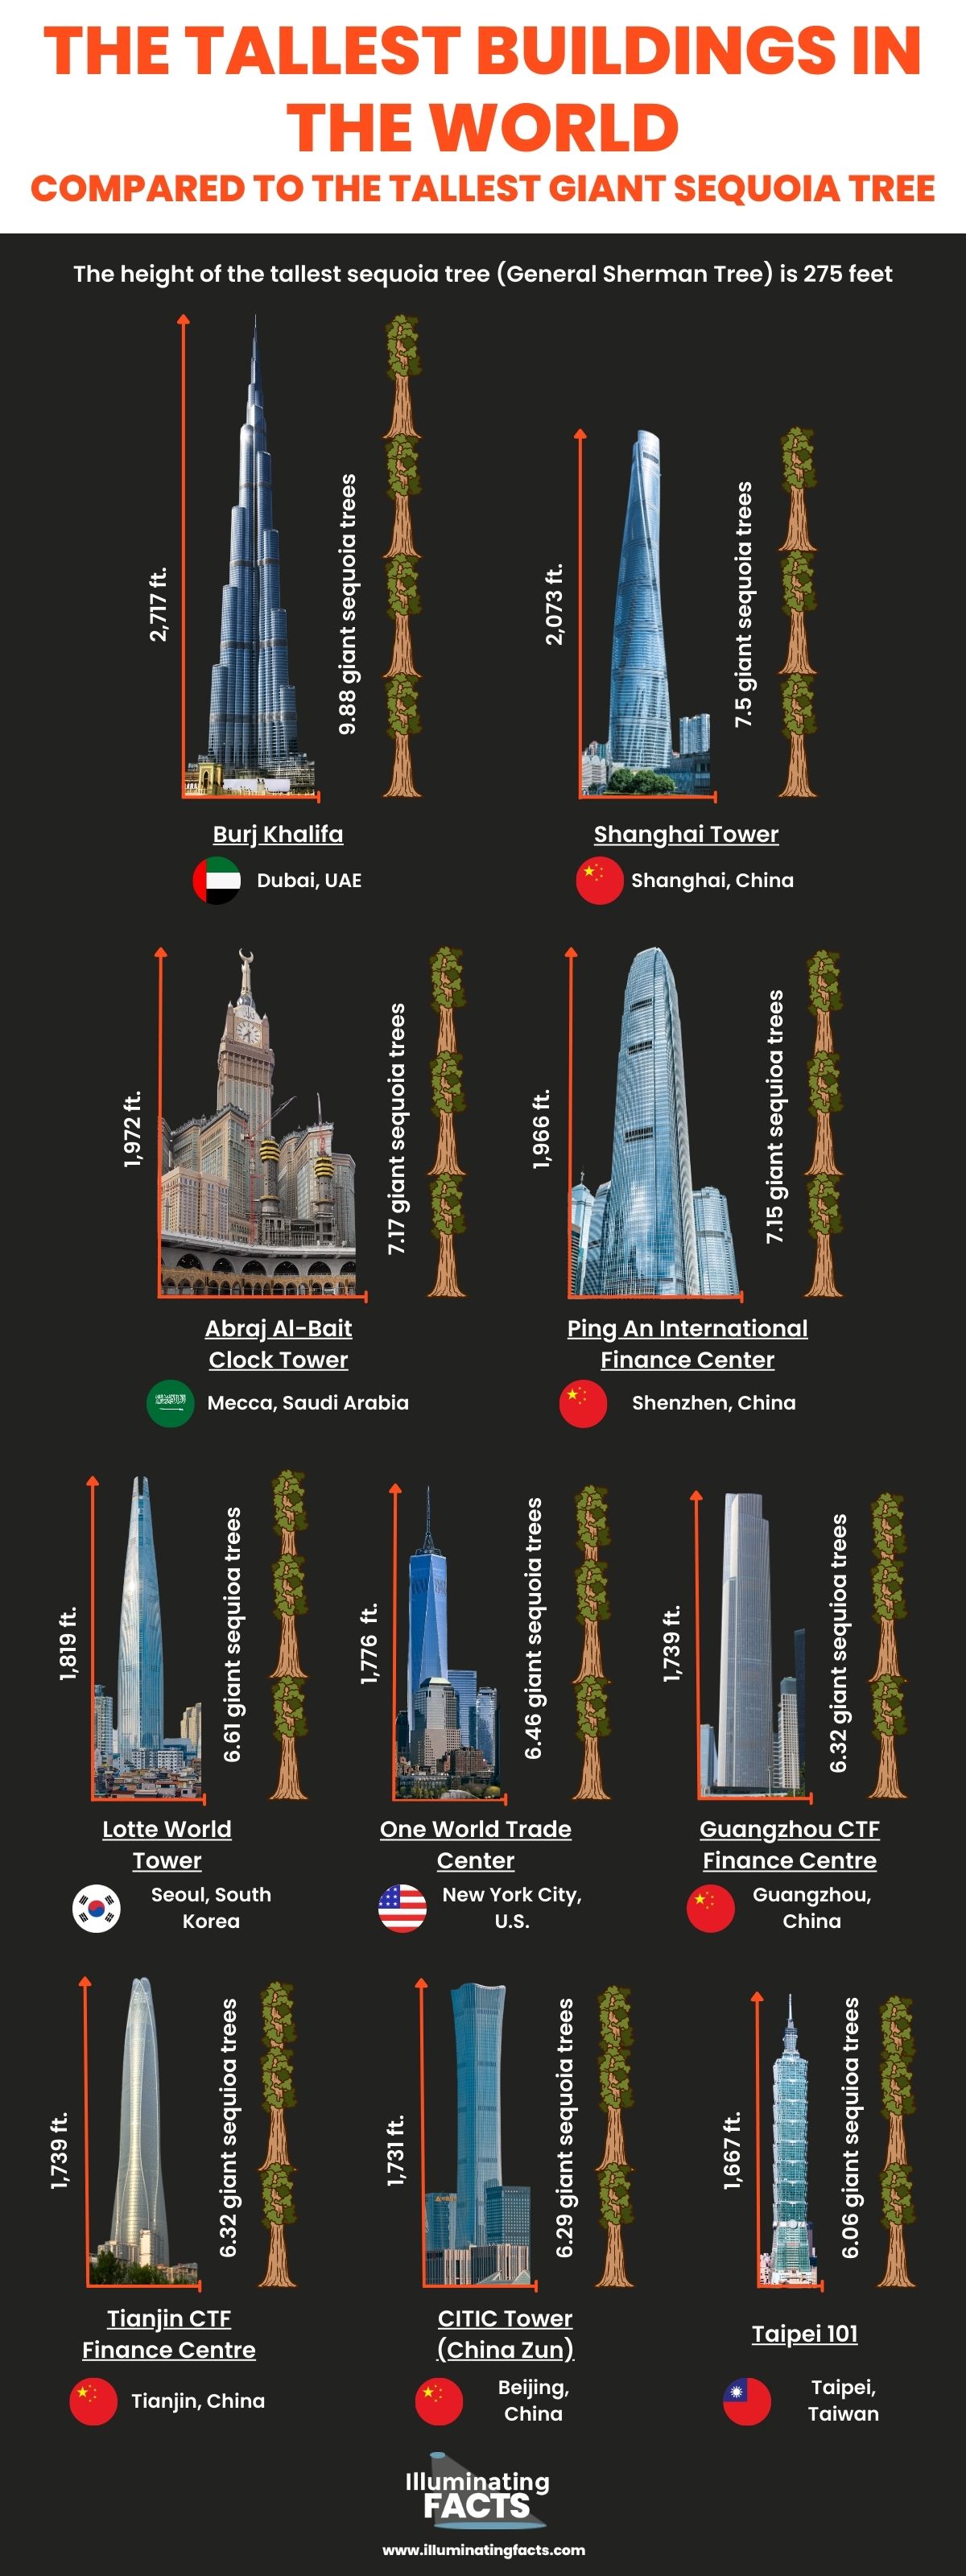 The Tallest Buildings in the World Compared to the Tallest Giant Sequoia Tree